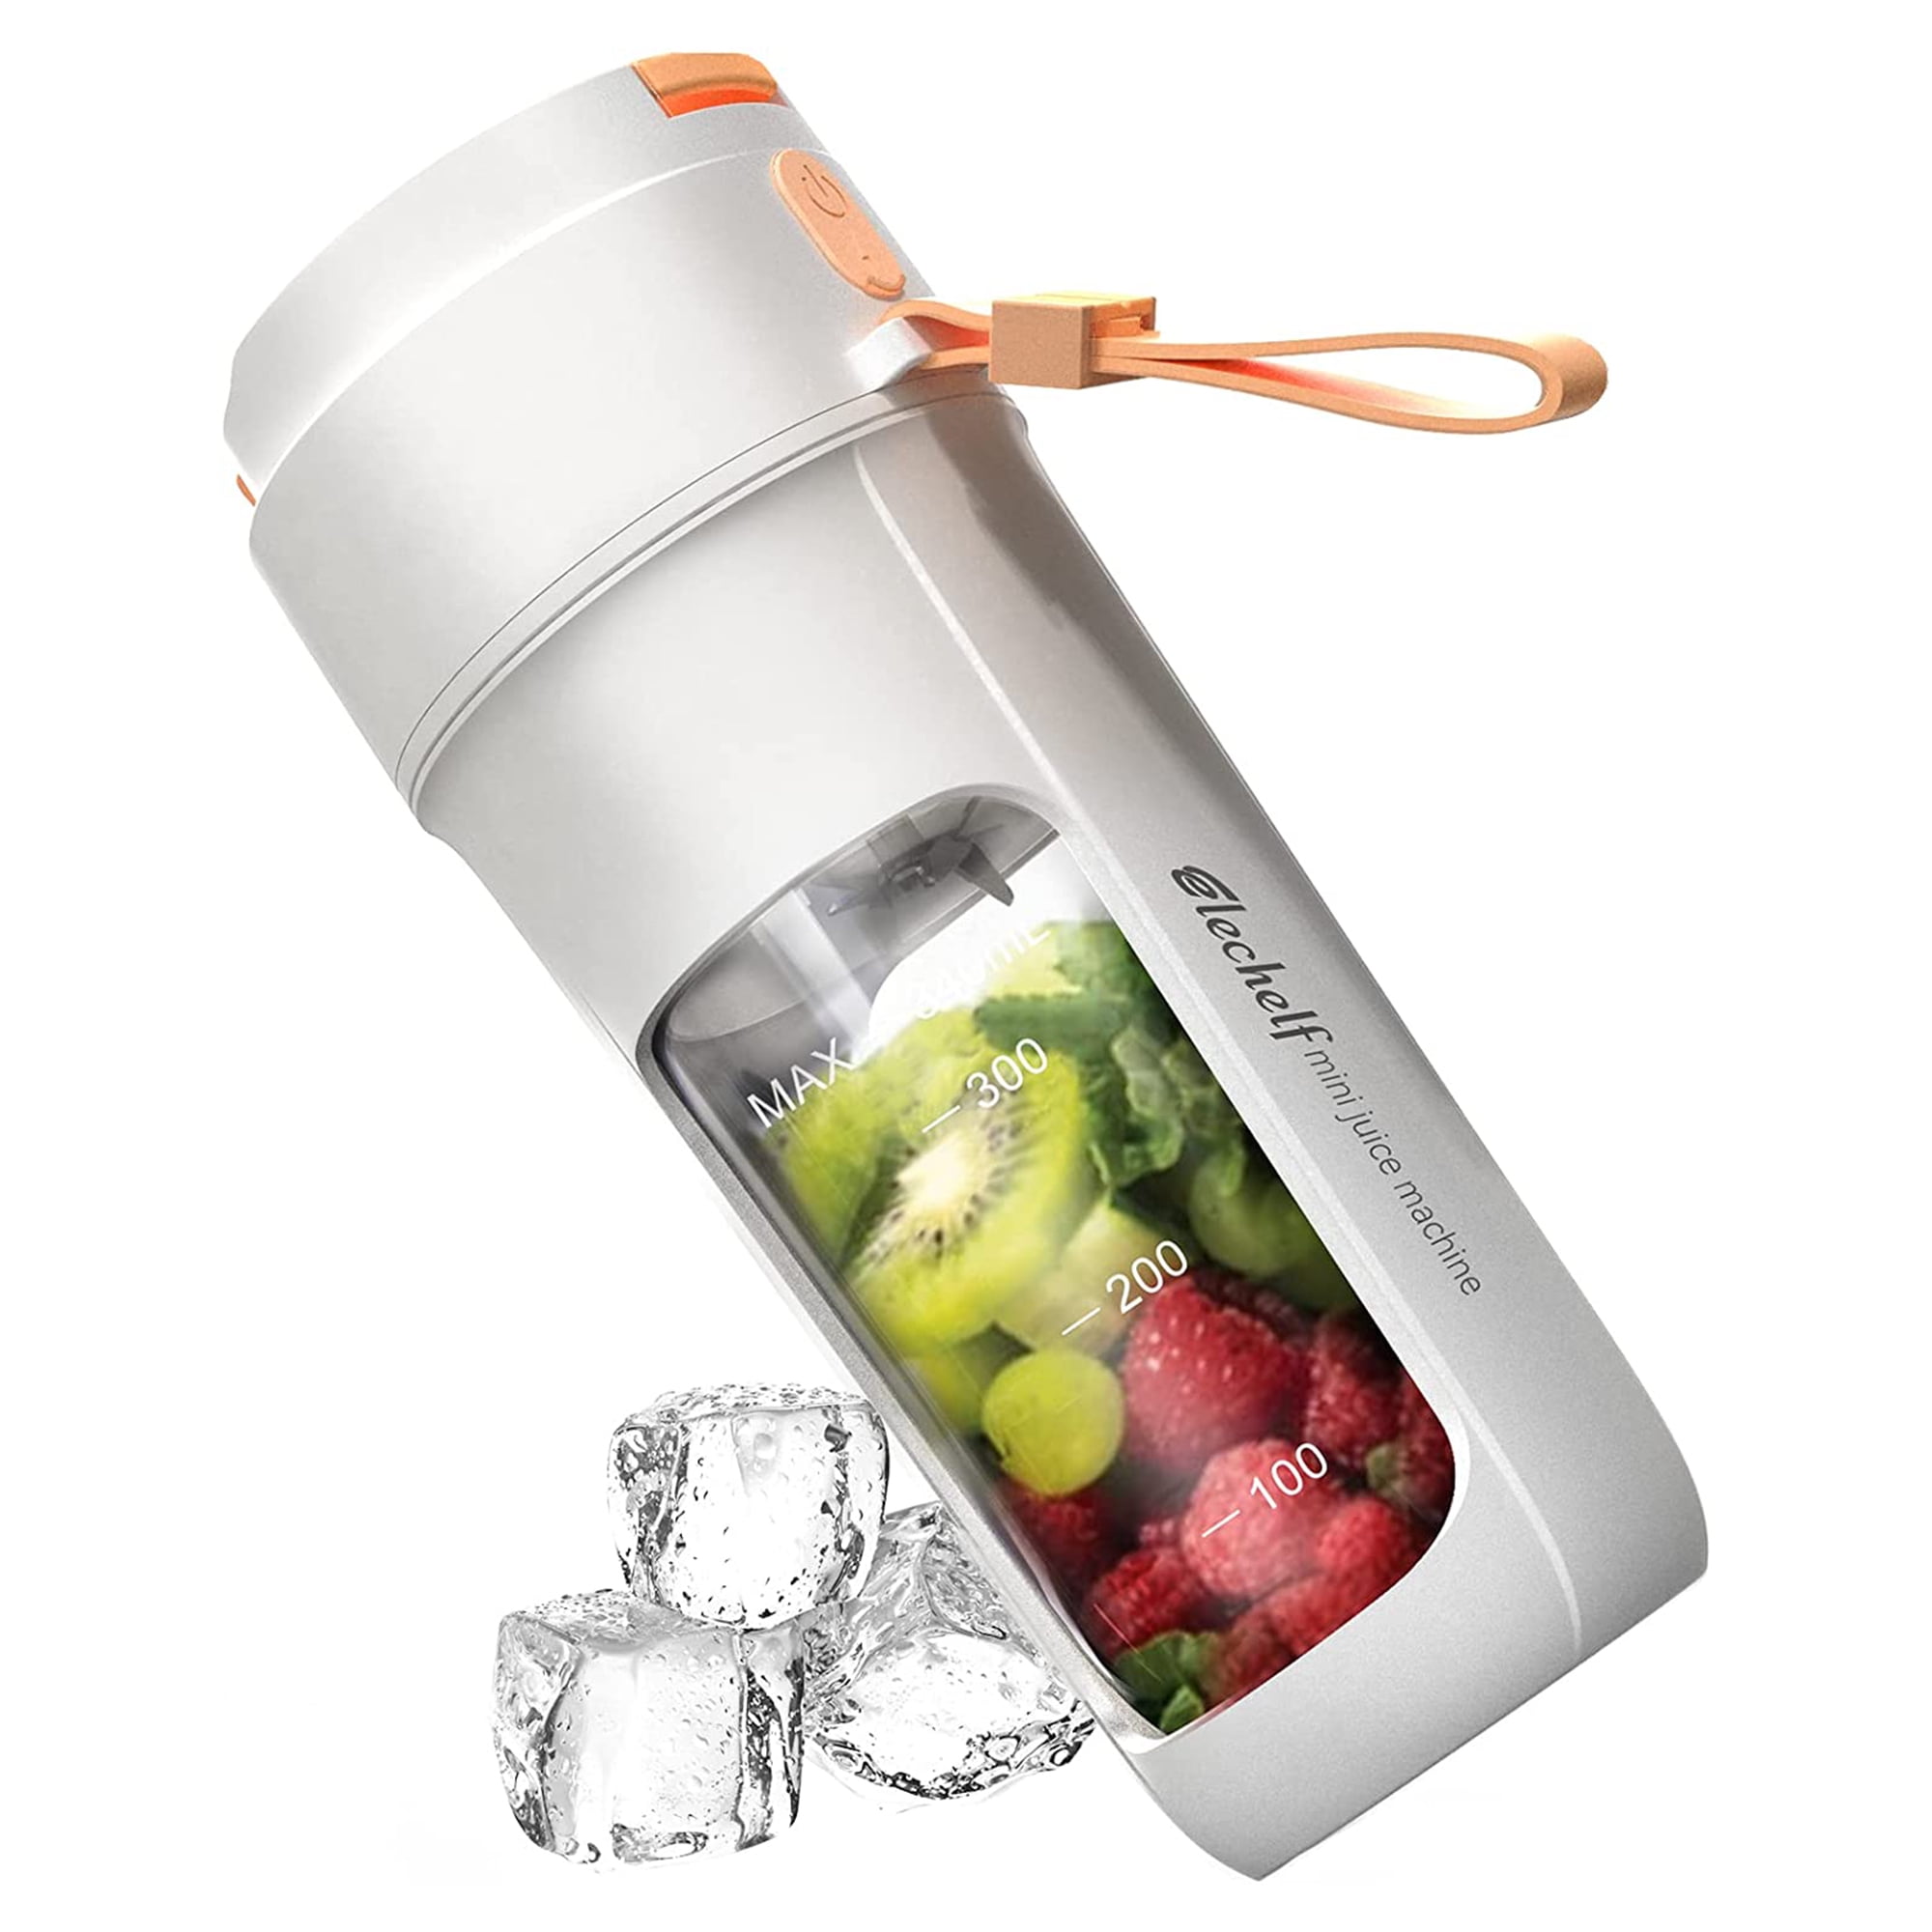 Fresh Juice Bottle Bender - Personal Blender On the go - Crushes Ice and  Frozen Fruits - Mini Small Hand Mixer for Home, Camping, Outdoors -  Wireless